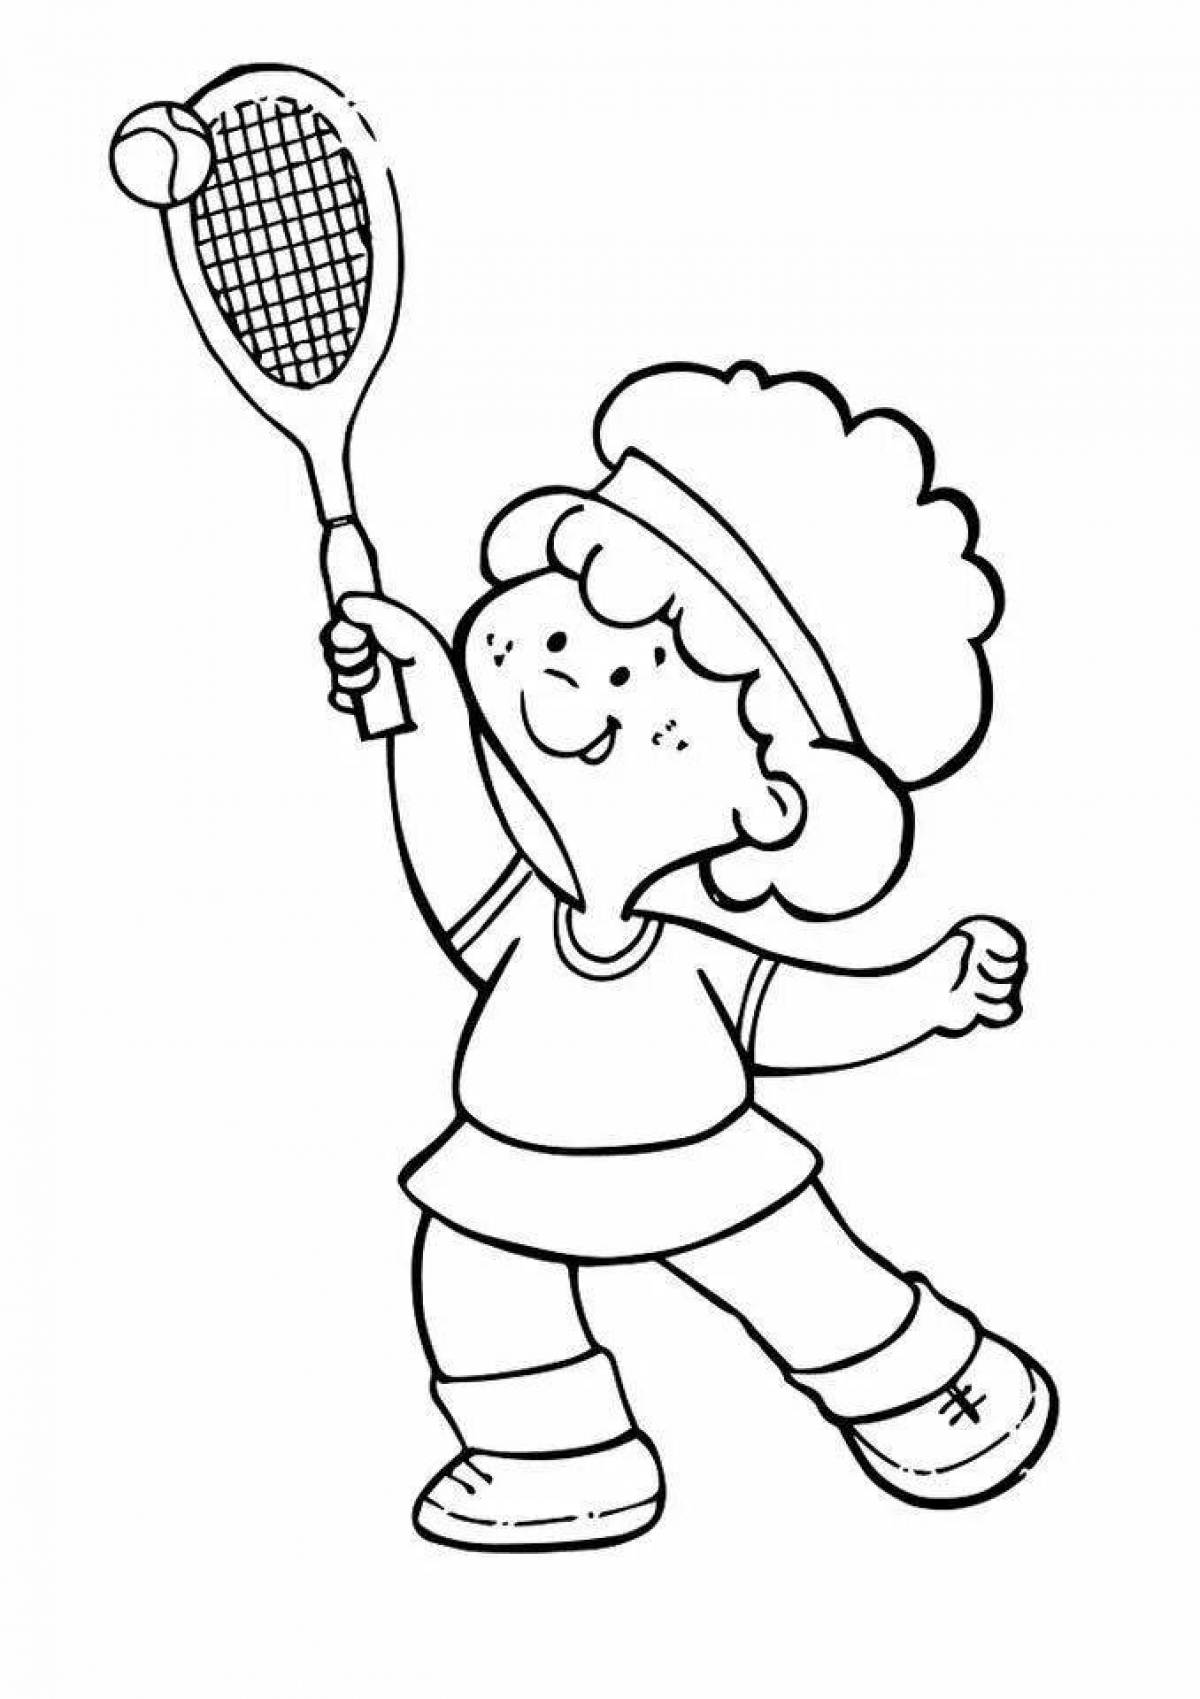 Fun sports coloring pages for kids